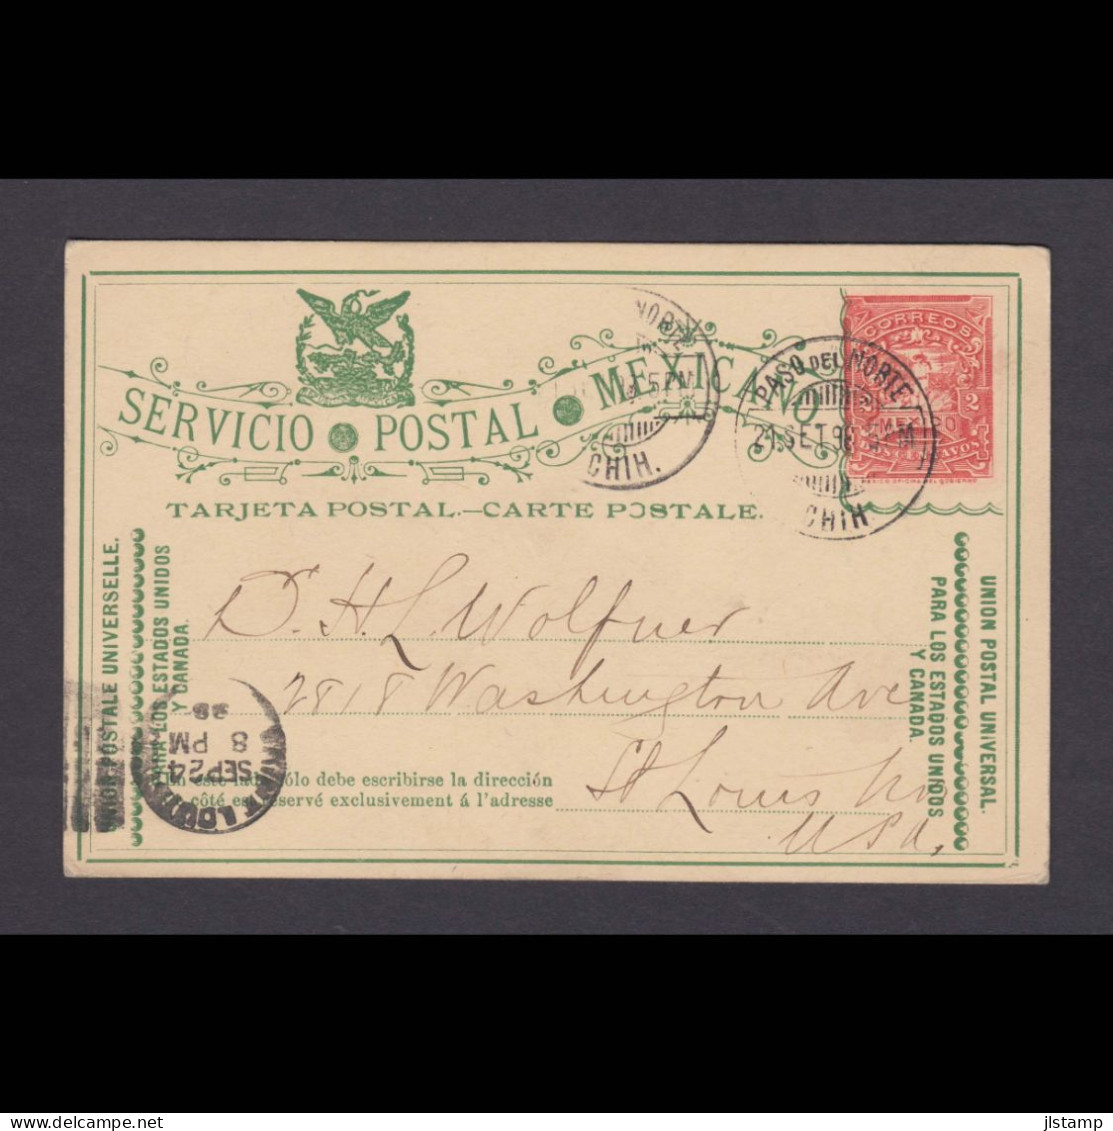 Mexico 1898 Fine Used Stamped Postcard Stationery,VF - Mexico